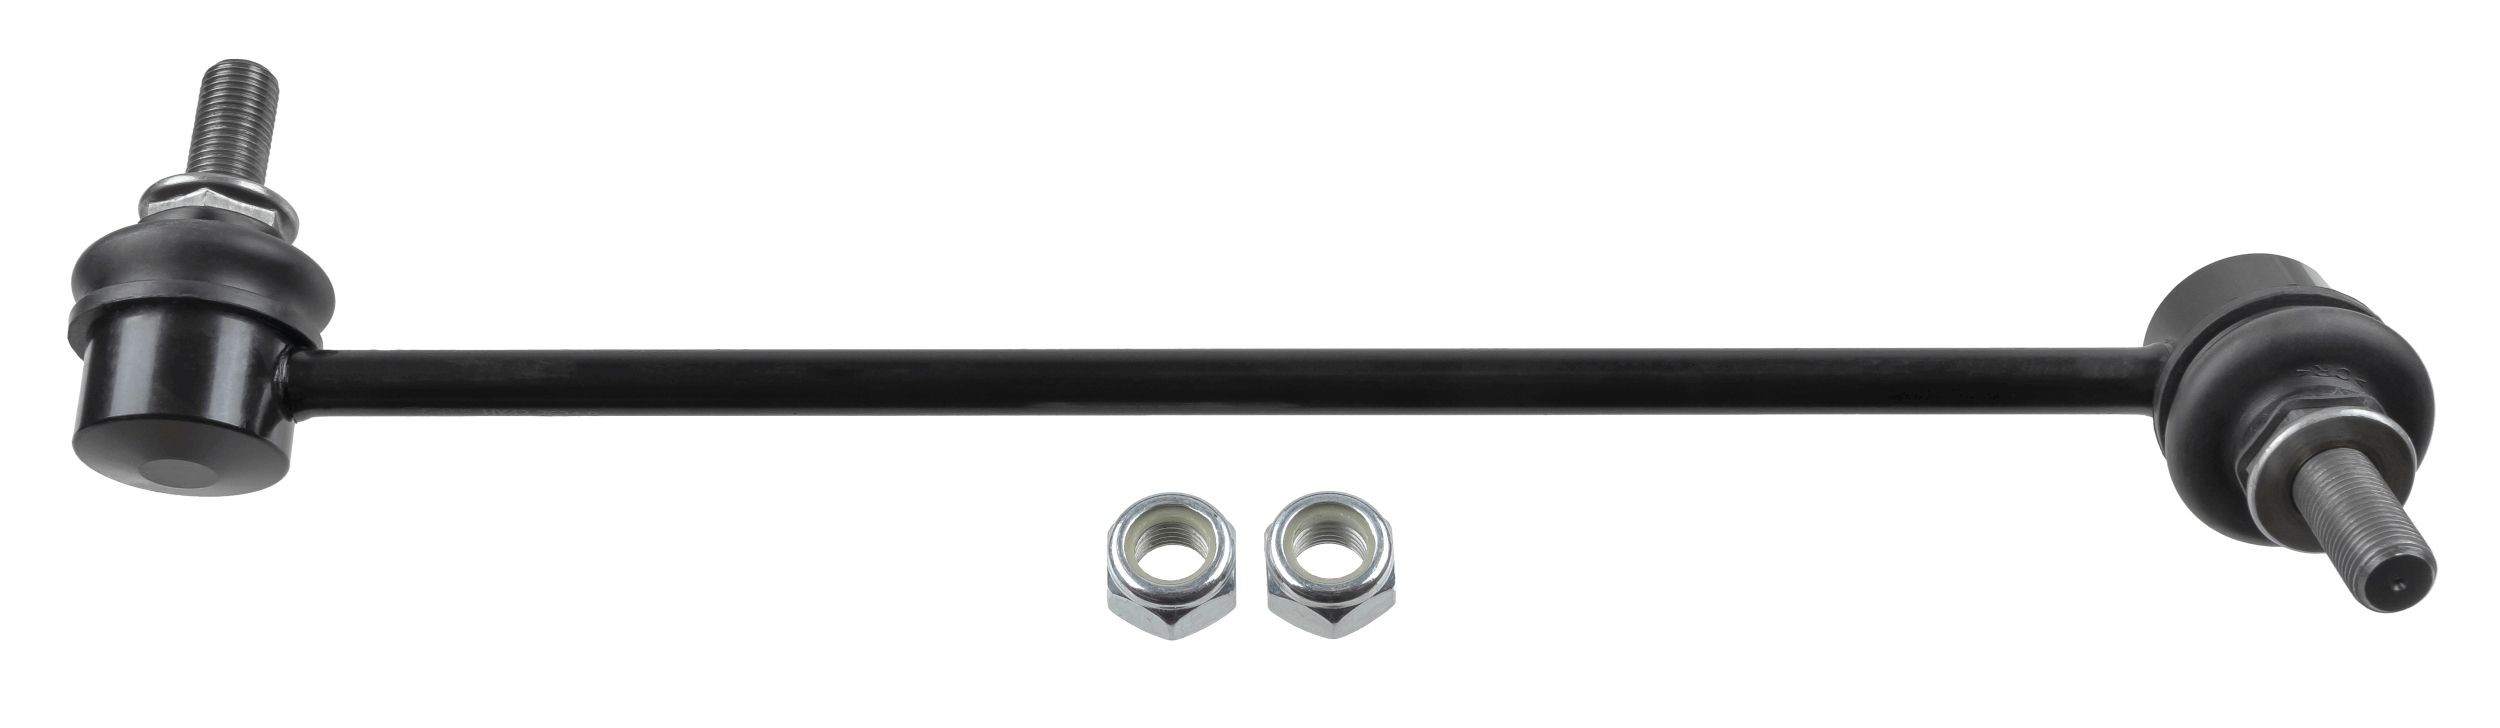 LEMFÖRDER 308mm, M12*1.25 , for left-hand/right-hand drive vehicles Length: 308mm Drop link 38618 01 buy